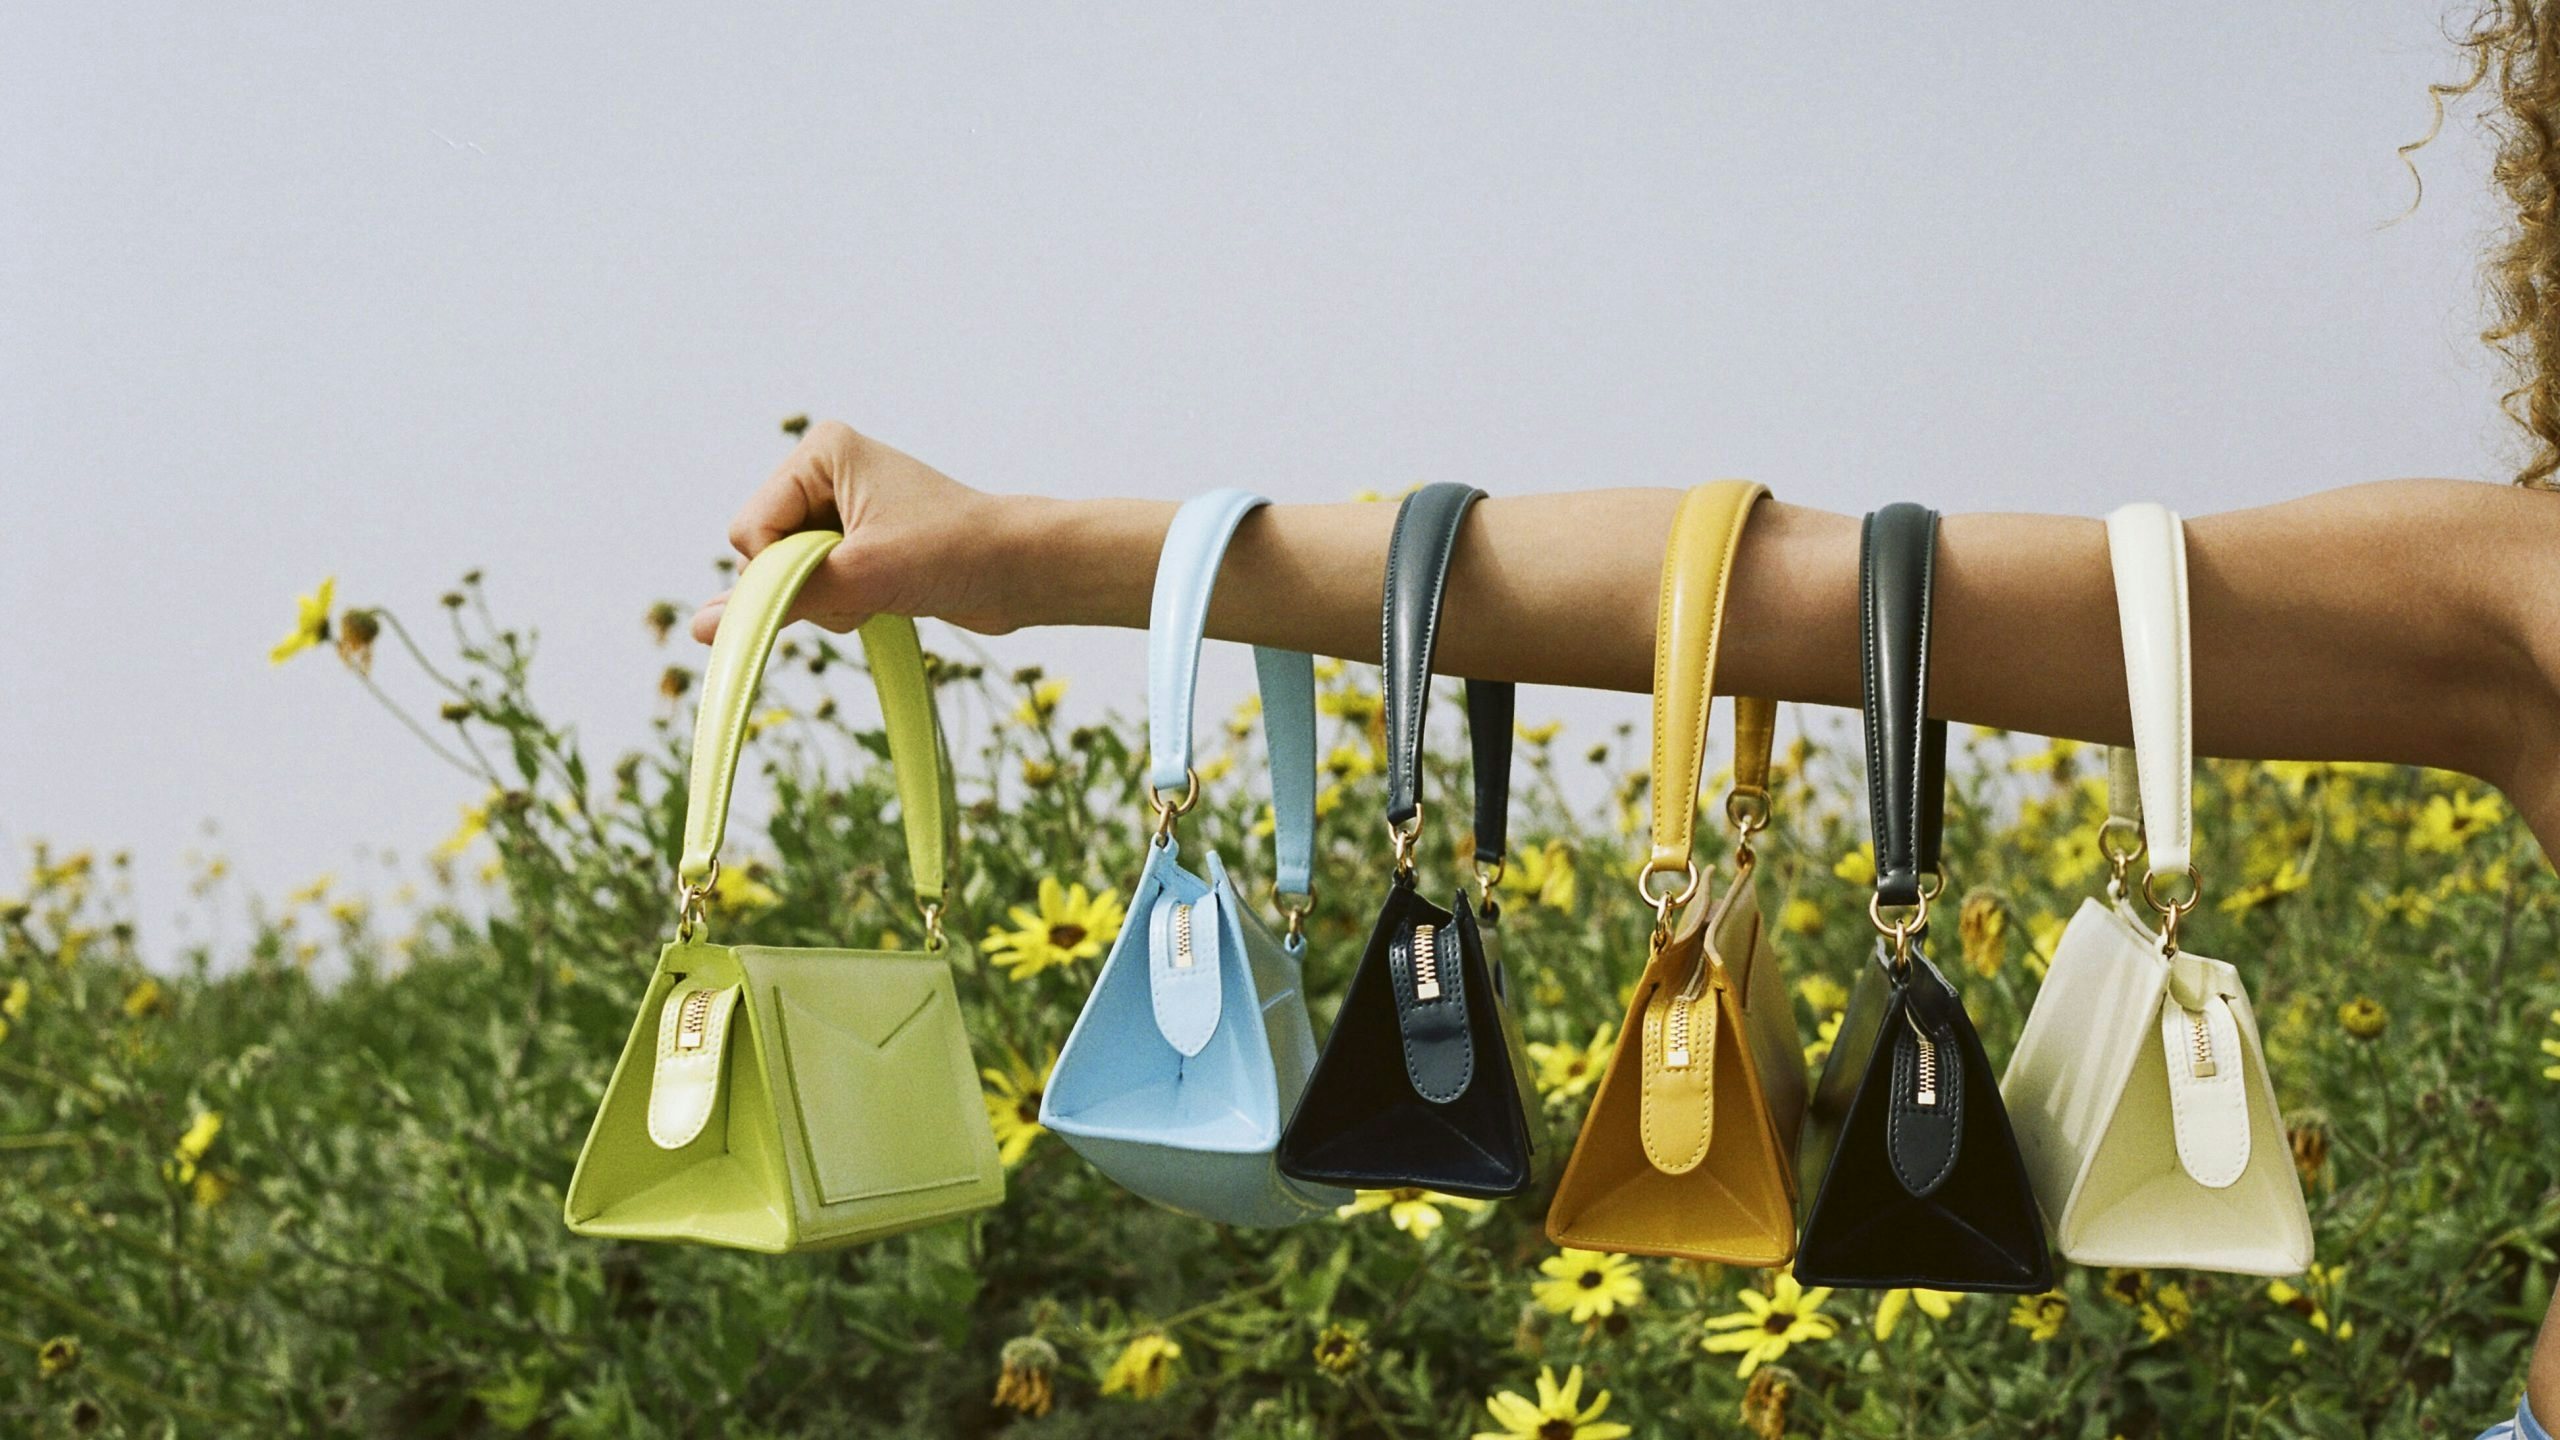 Niche brand Mansur Gavriel is attacking China digitally and physically by launching a flagship store on WeChat and a store in SKP Beijing. But is it already too late for the handbag line? Photo: Courtesy of Mansur Gavriel